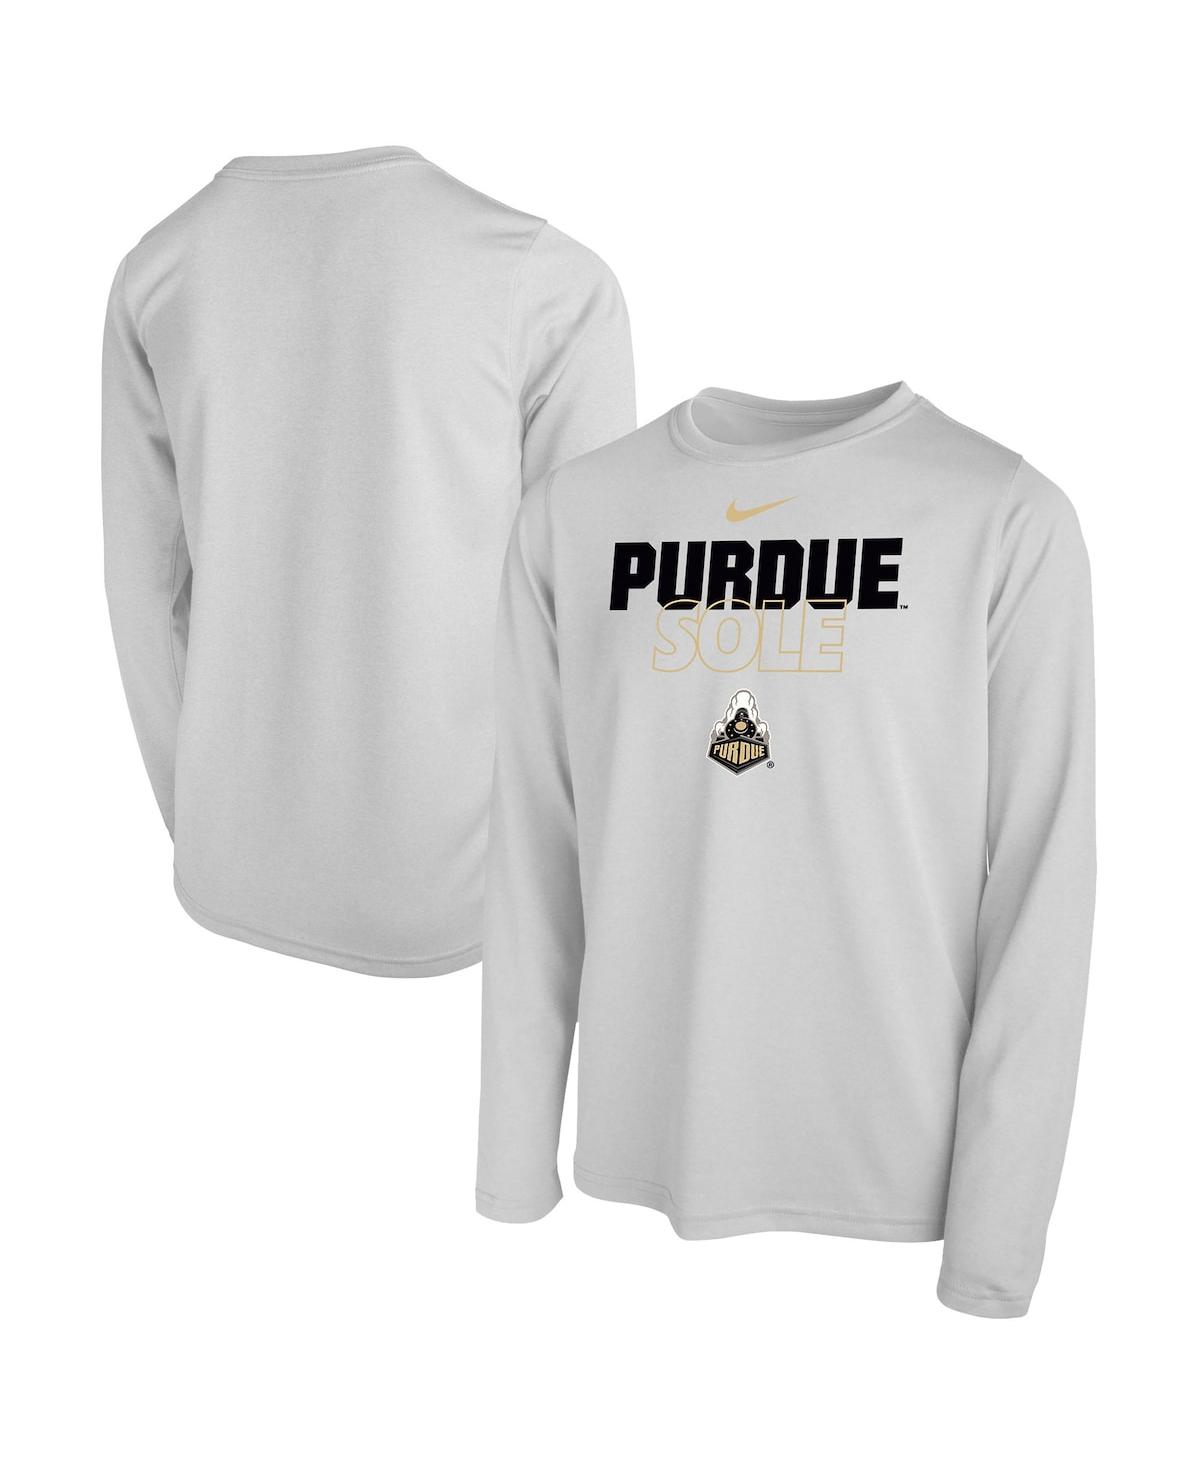 Nike Kids' Big Boys And Girls  White Purdue Boilermakers Sole Bench T-shirt